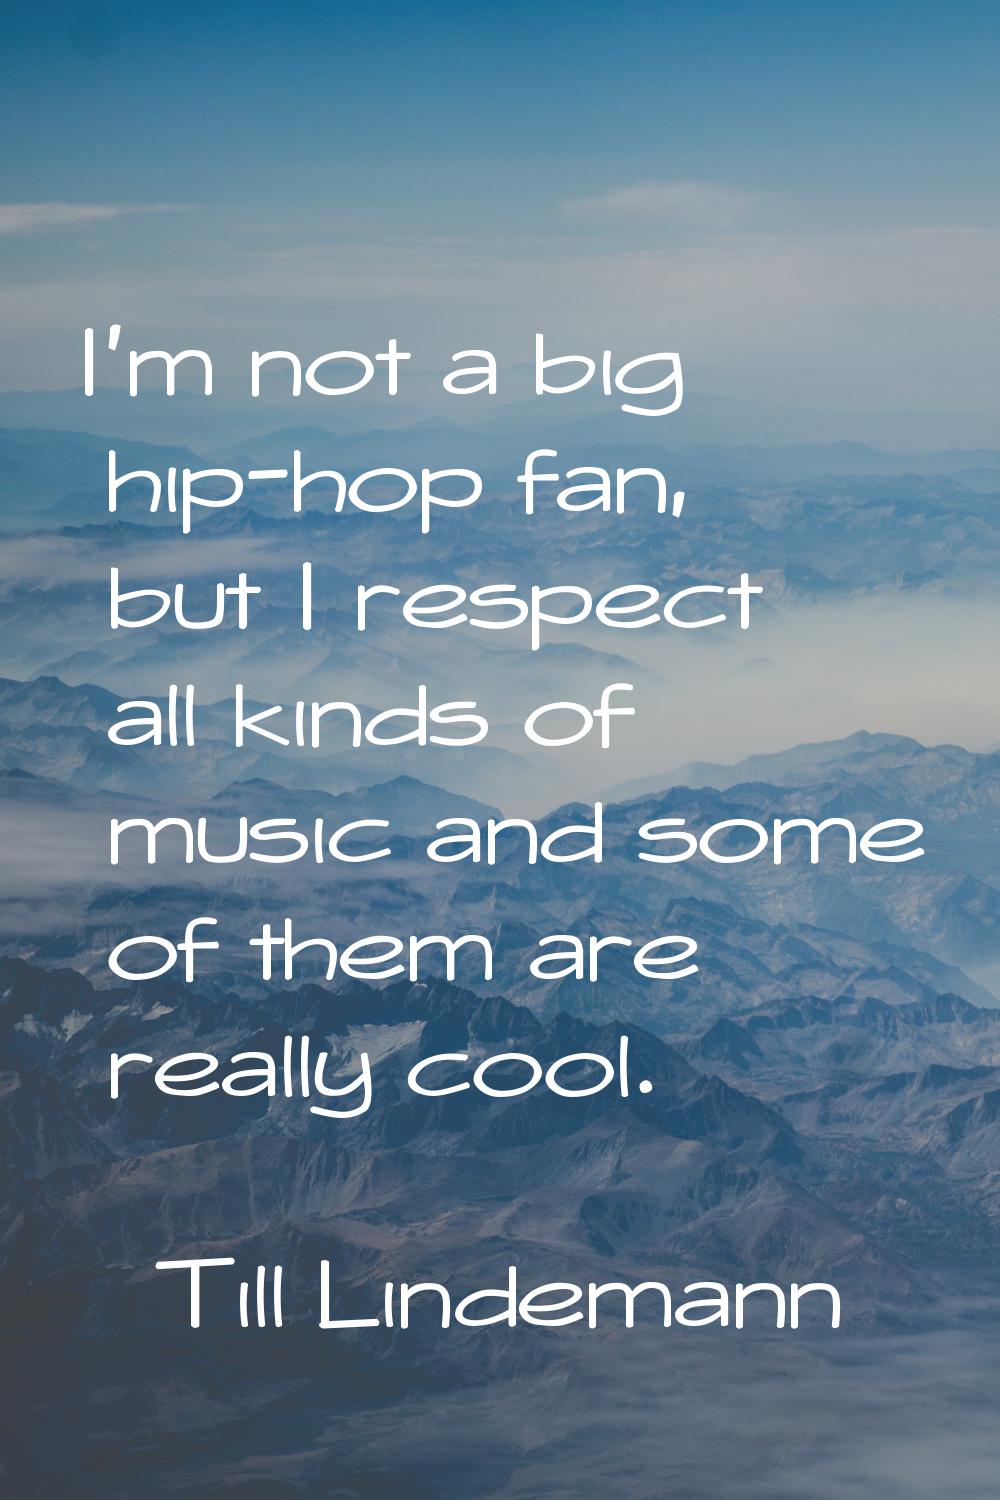 I'm not a big hip-hop fan, but I respect all kinds of music and some of them are really cool.